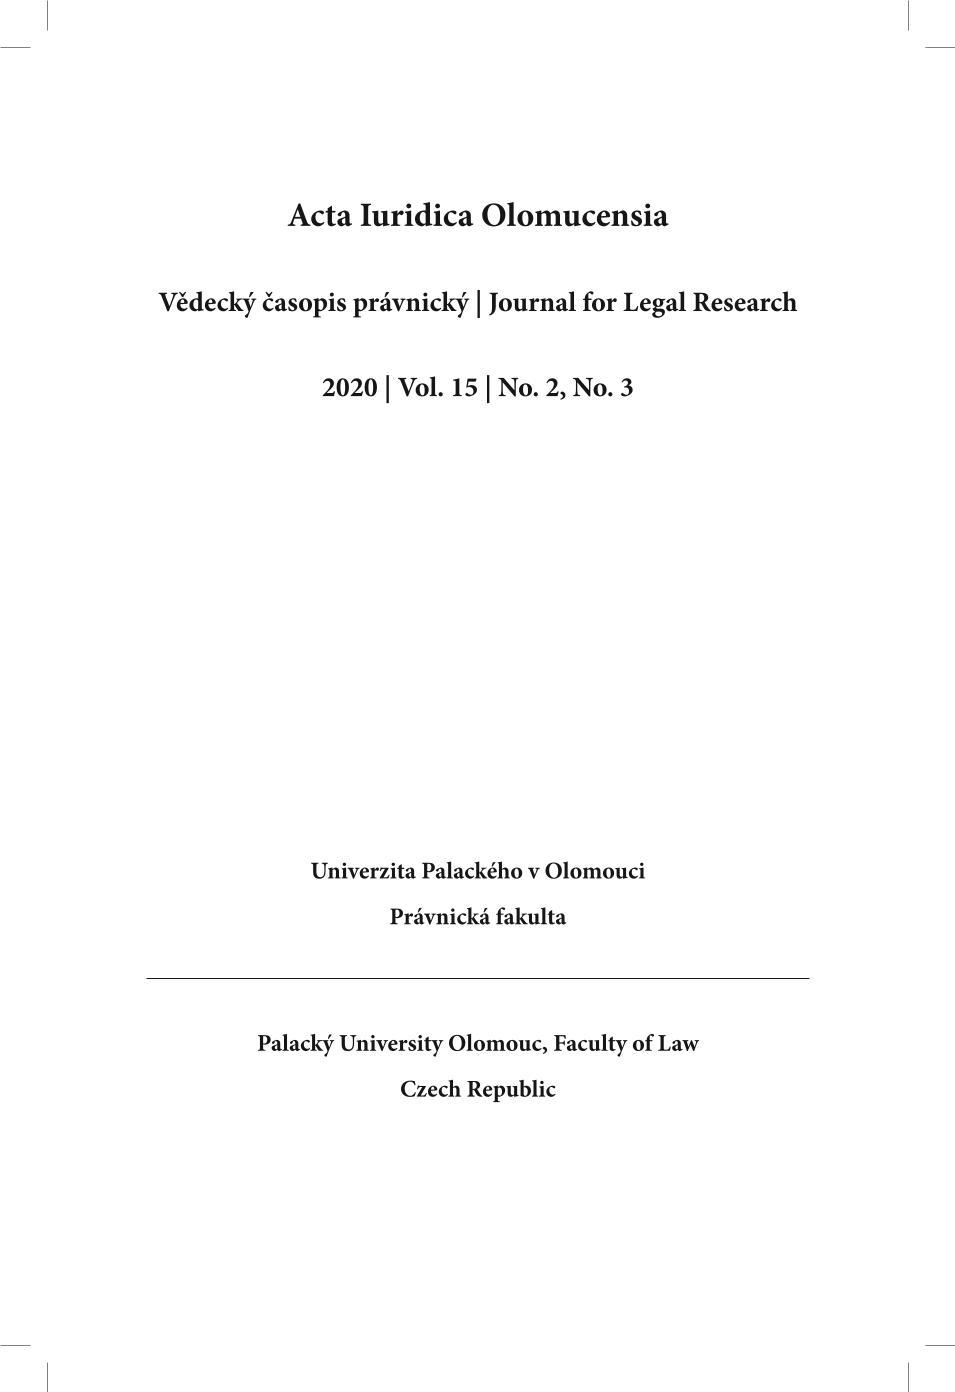 Supervision and Control of the Contractual Terms and Conditions within the Public Procurement in the Slovakia a Czech Republic Cover Image